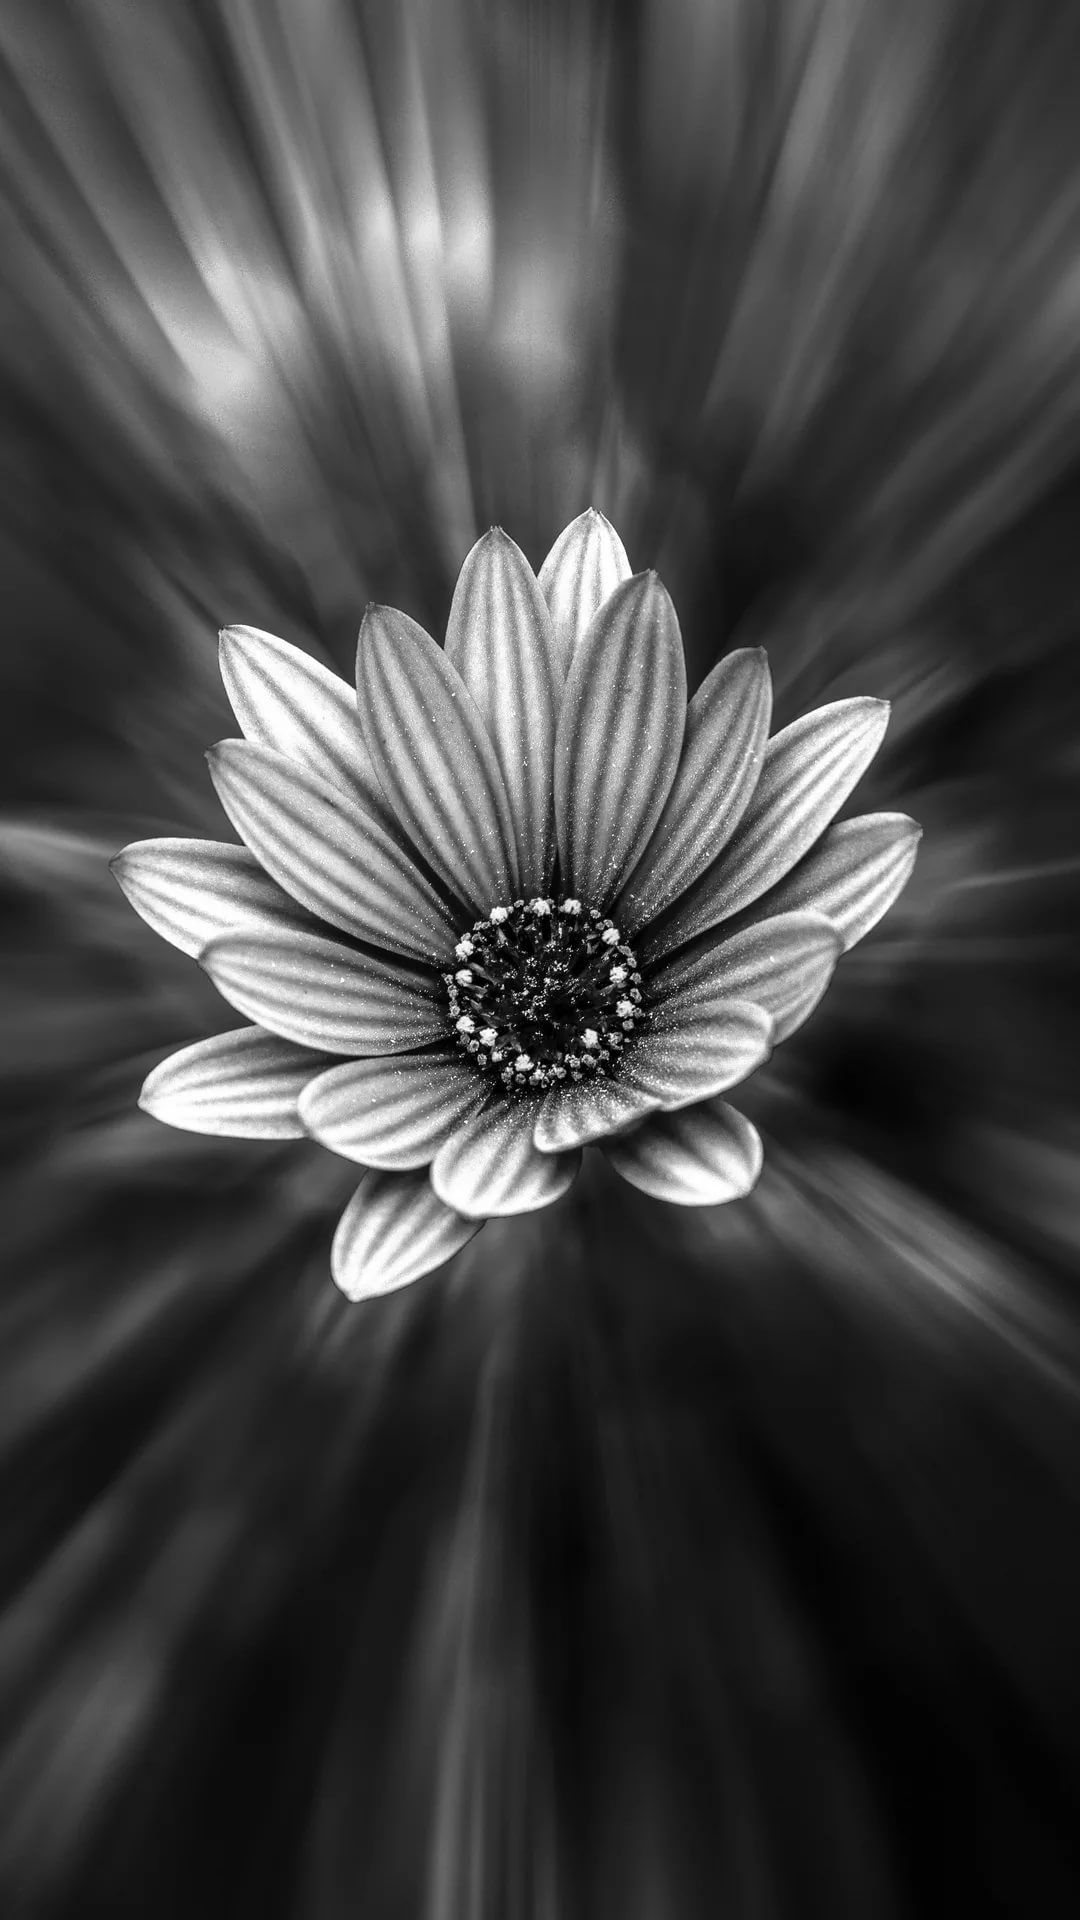 Black and White Flower iPhone Wallpaper: Image